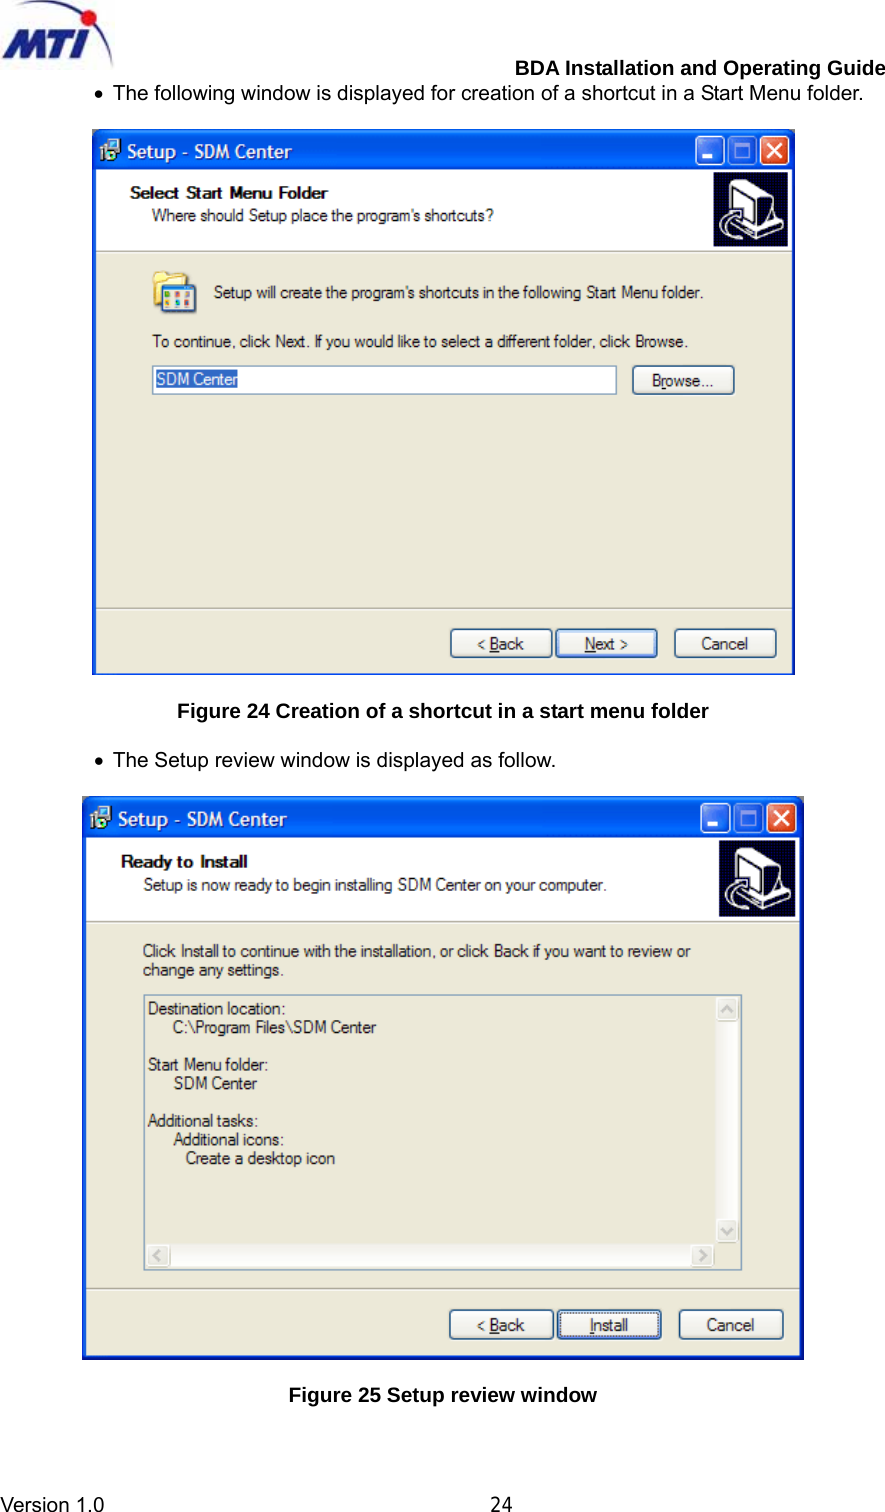         BDA Installation and Operating Guide Version 1.0                                       24 •  The following window is displayed for creation of a shortcut in a Start Menu folder.    Figure 24 Creation of a shortcut in a start menu folder  •  The Setup review window is displayed as follow.    Figure 25 Setup review window  